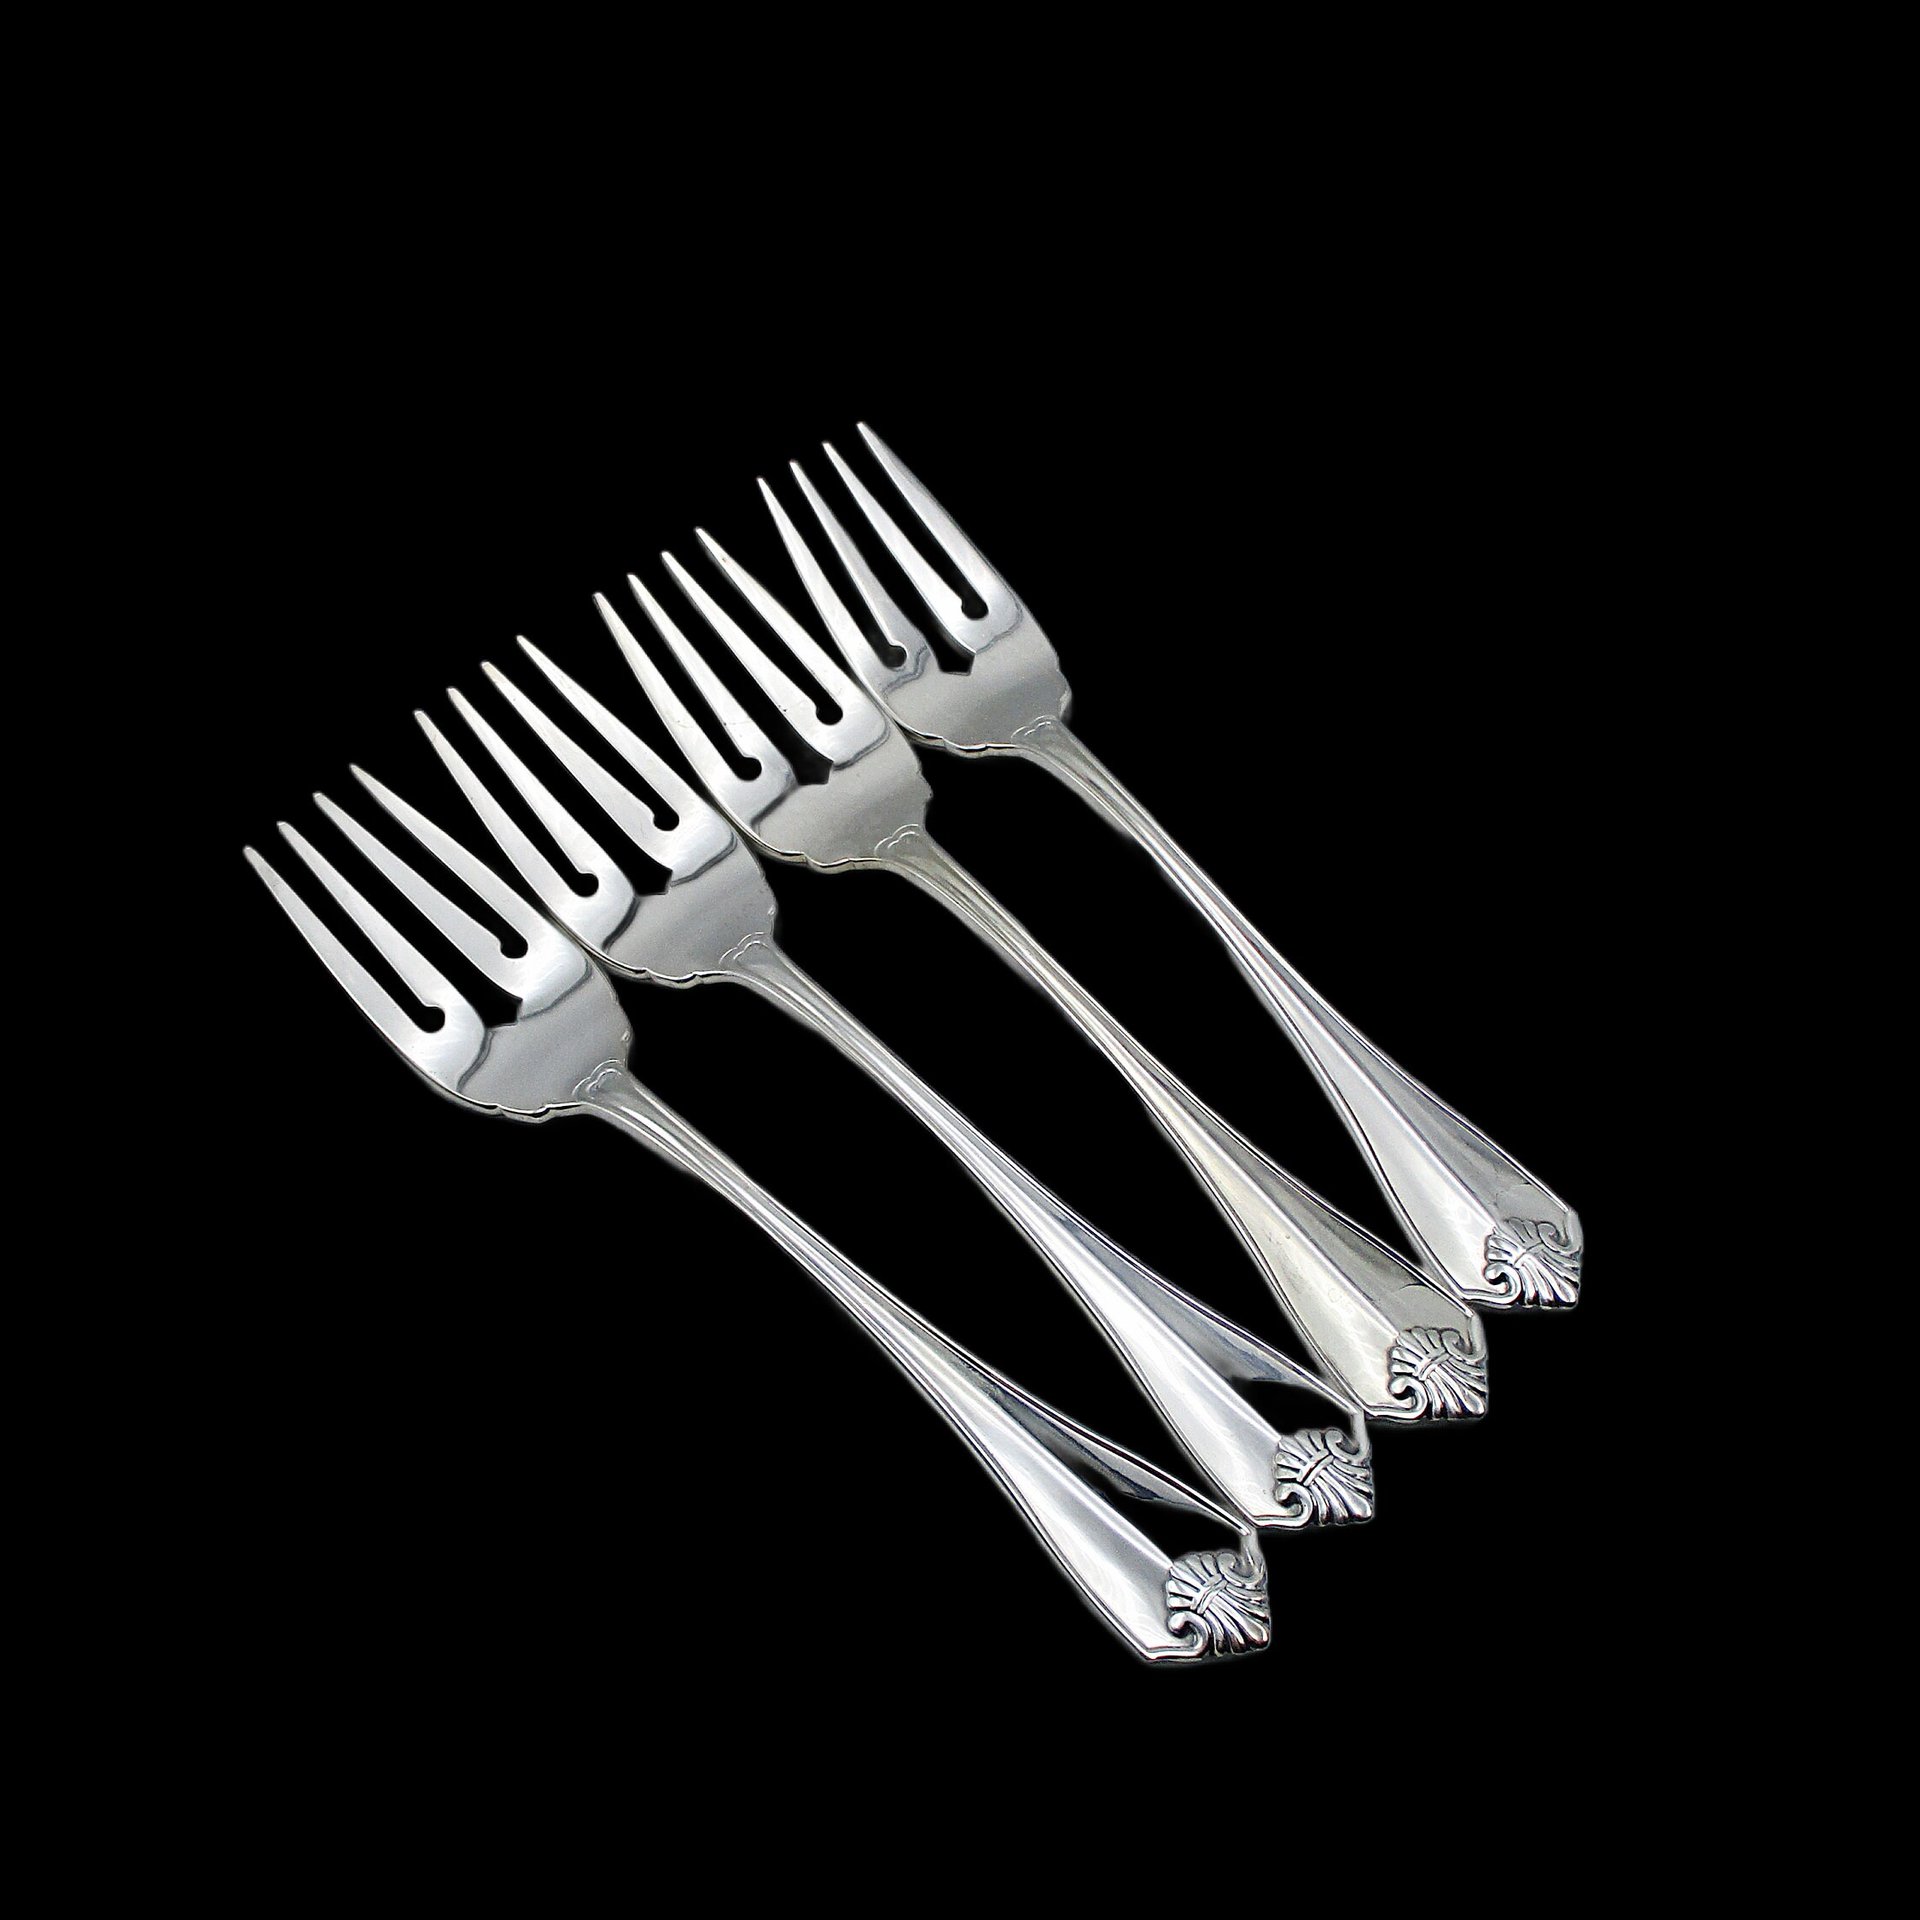 King James Silver Plate 4 Salad Forks, Oneida, Silverware Flatware Replacement Pieces, Excellent Condition